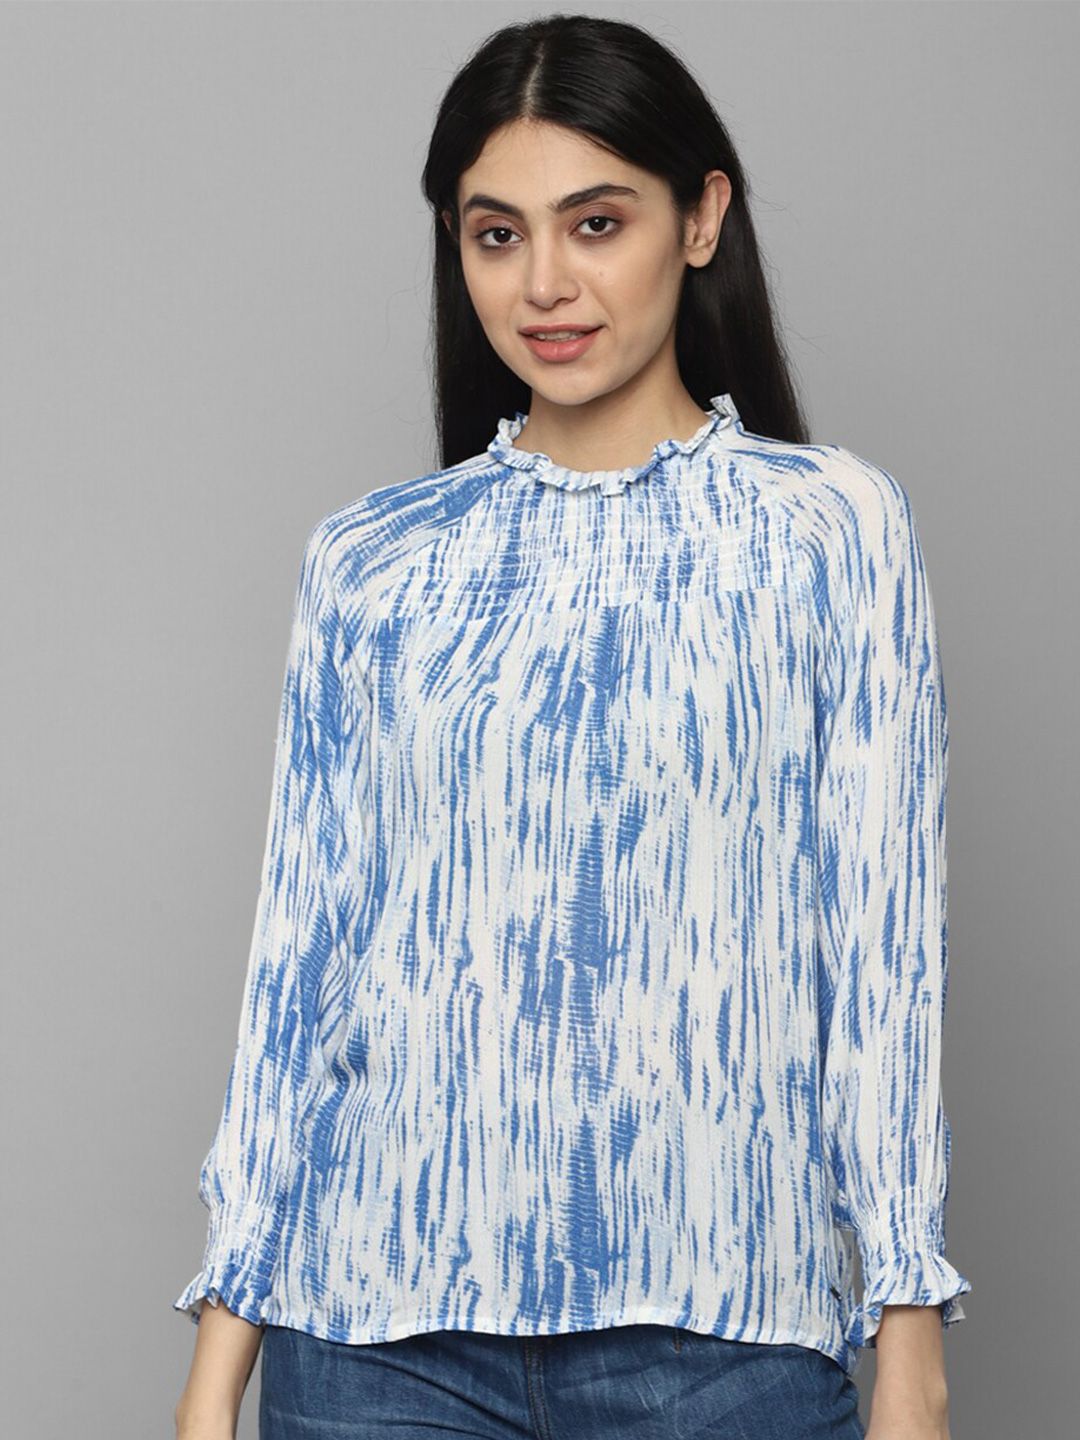 Allen Solly Woman Blue & White Tie and Dye Blouson Top Price in India